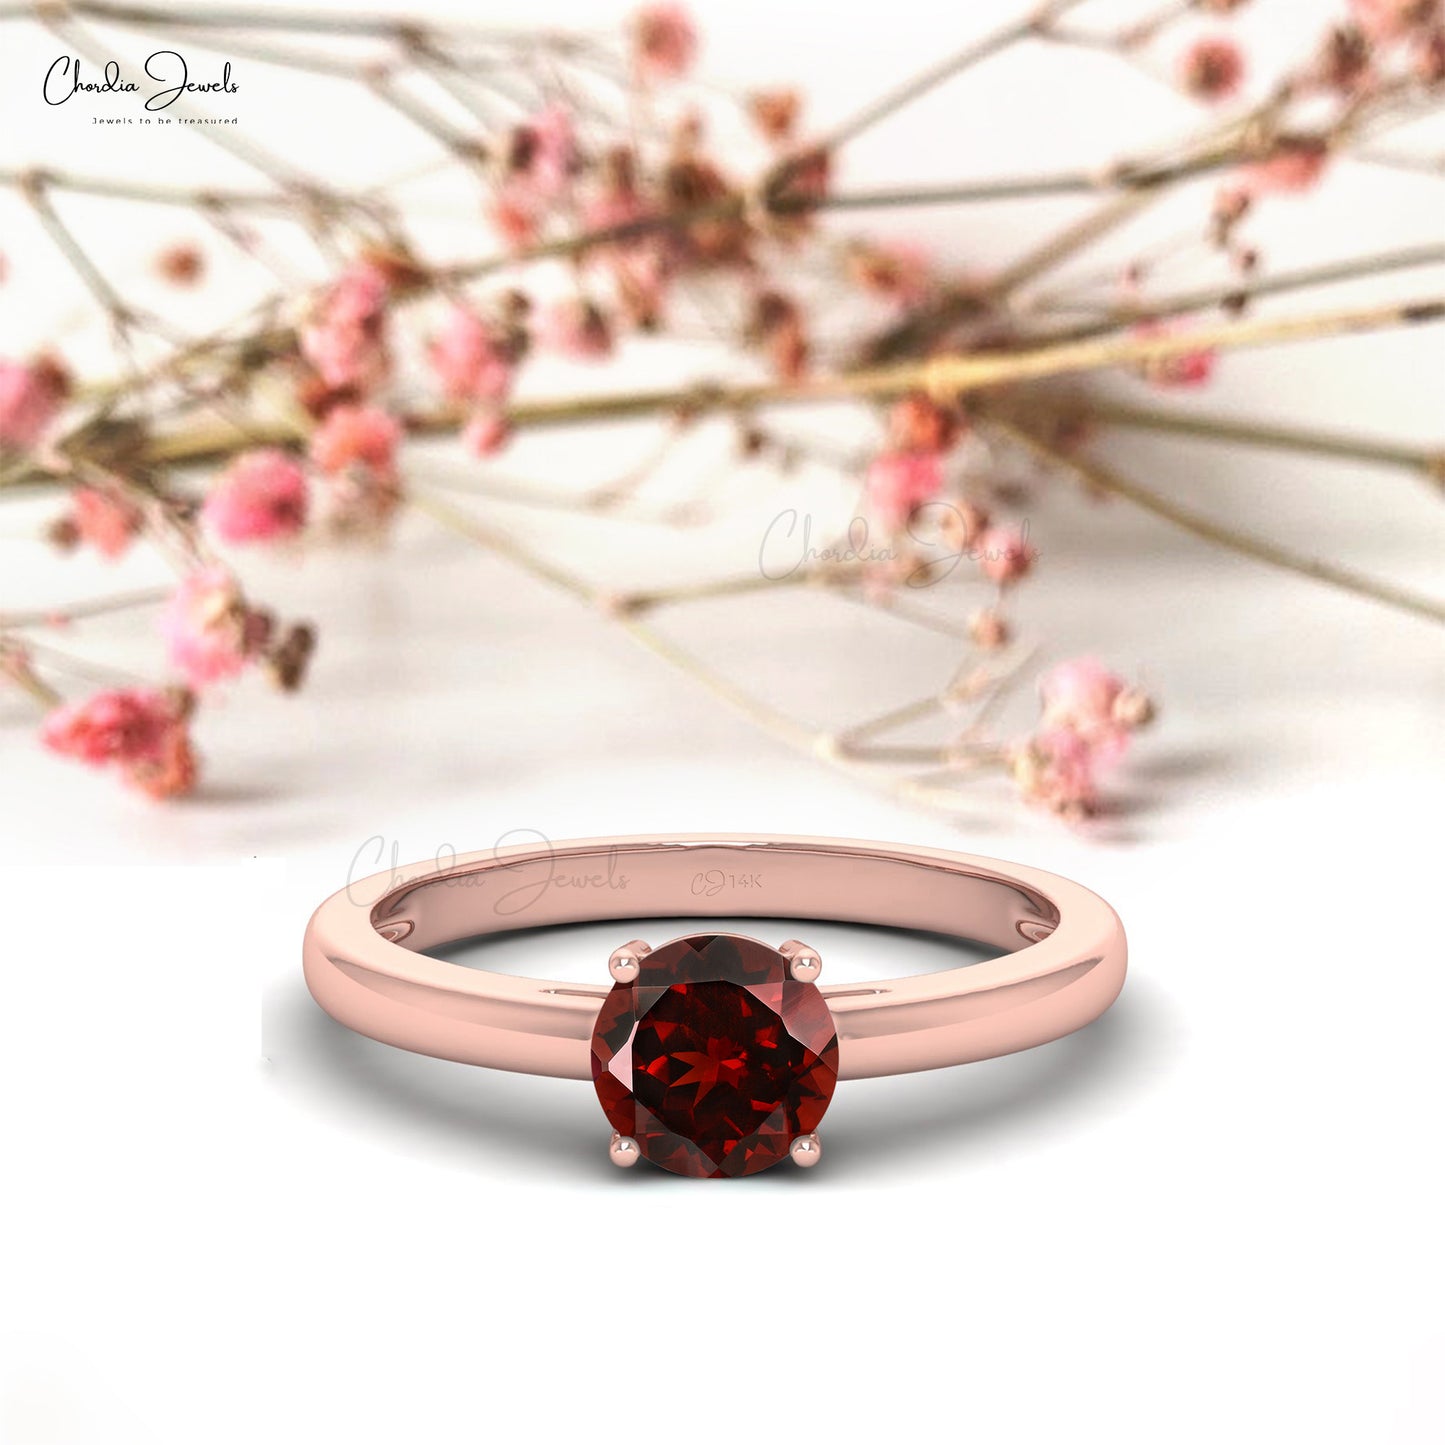 Natural 1.1 Carats Garnet Solitaire Ring For Her in 14k Solid Gold